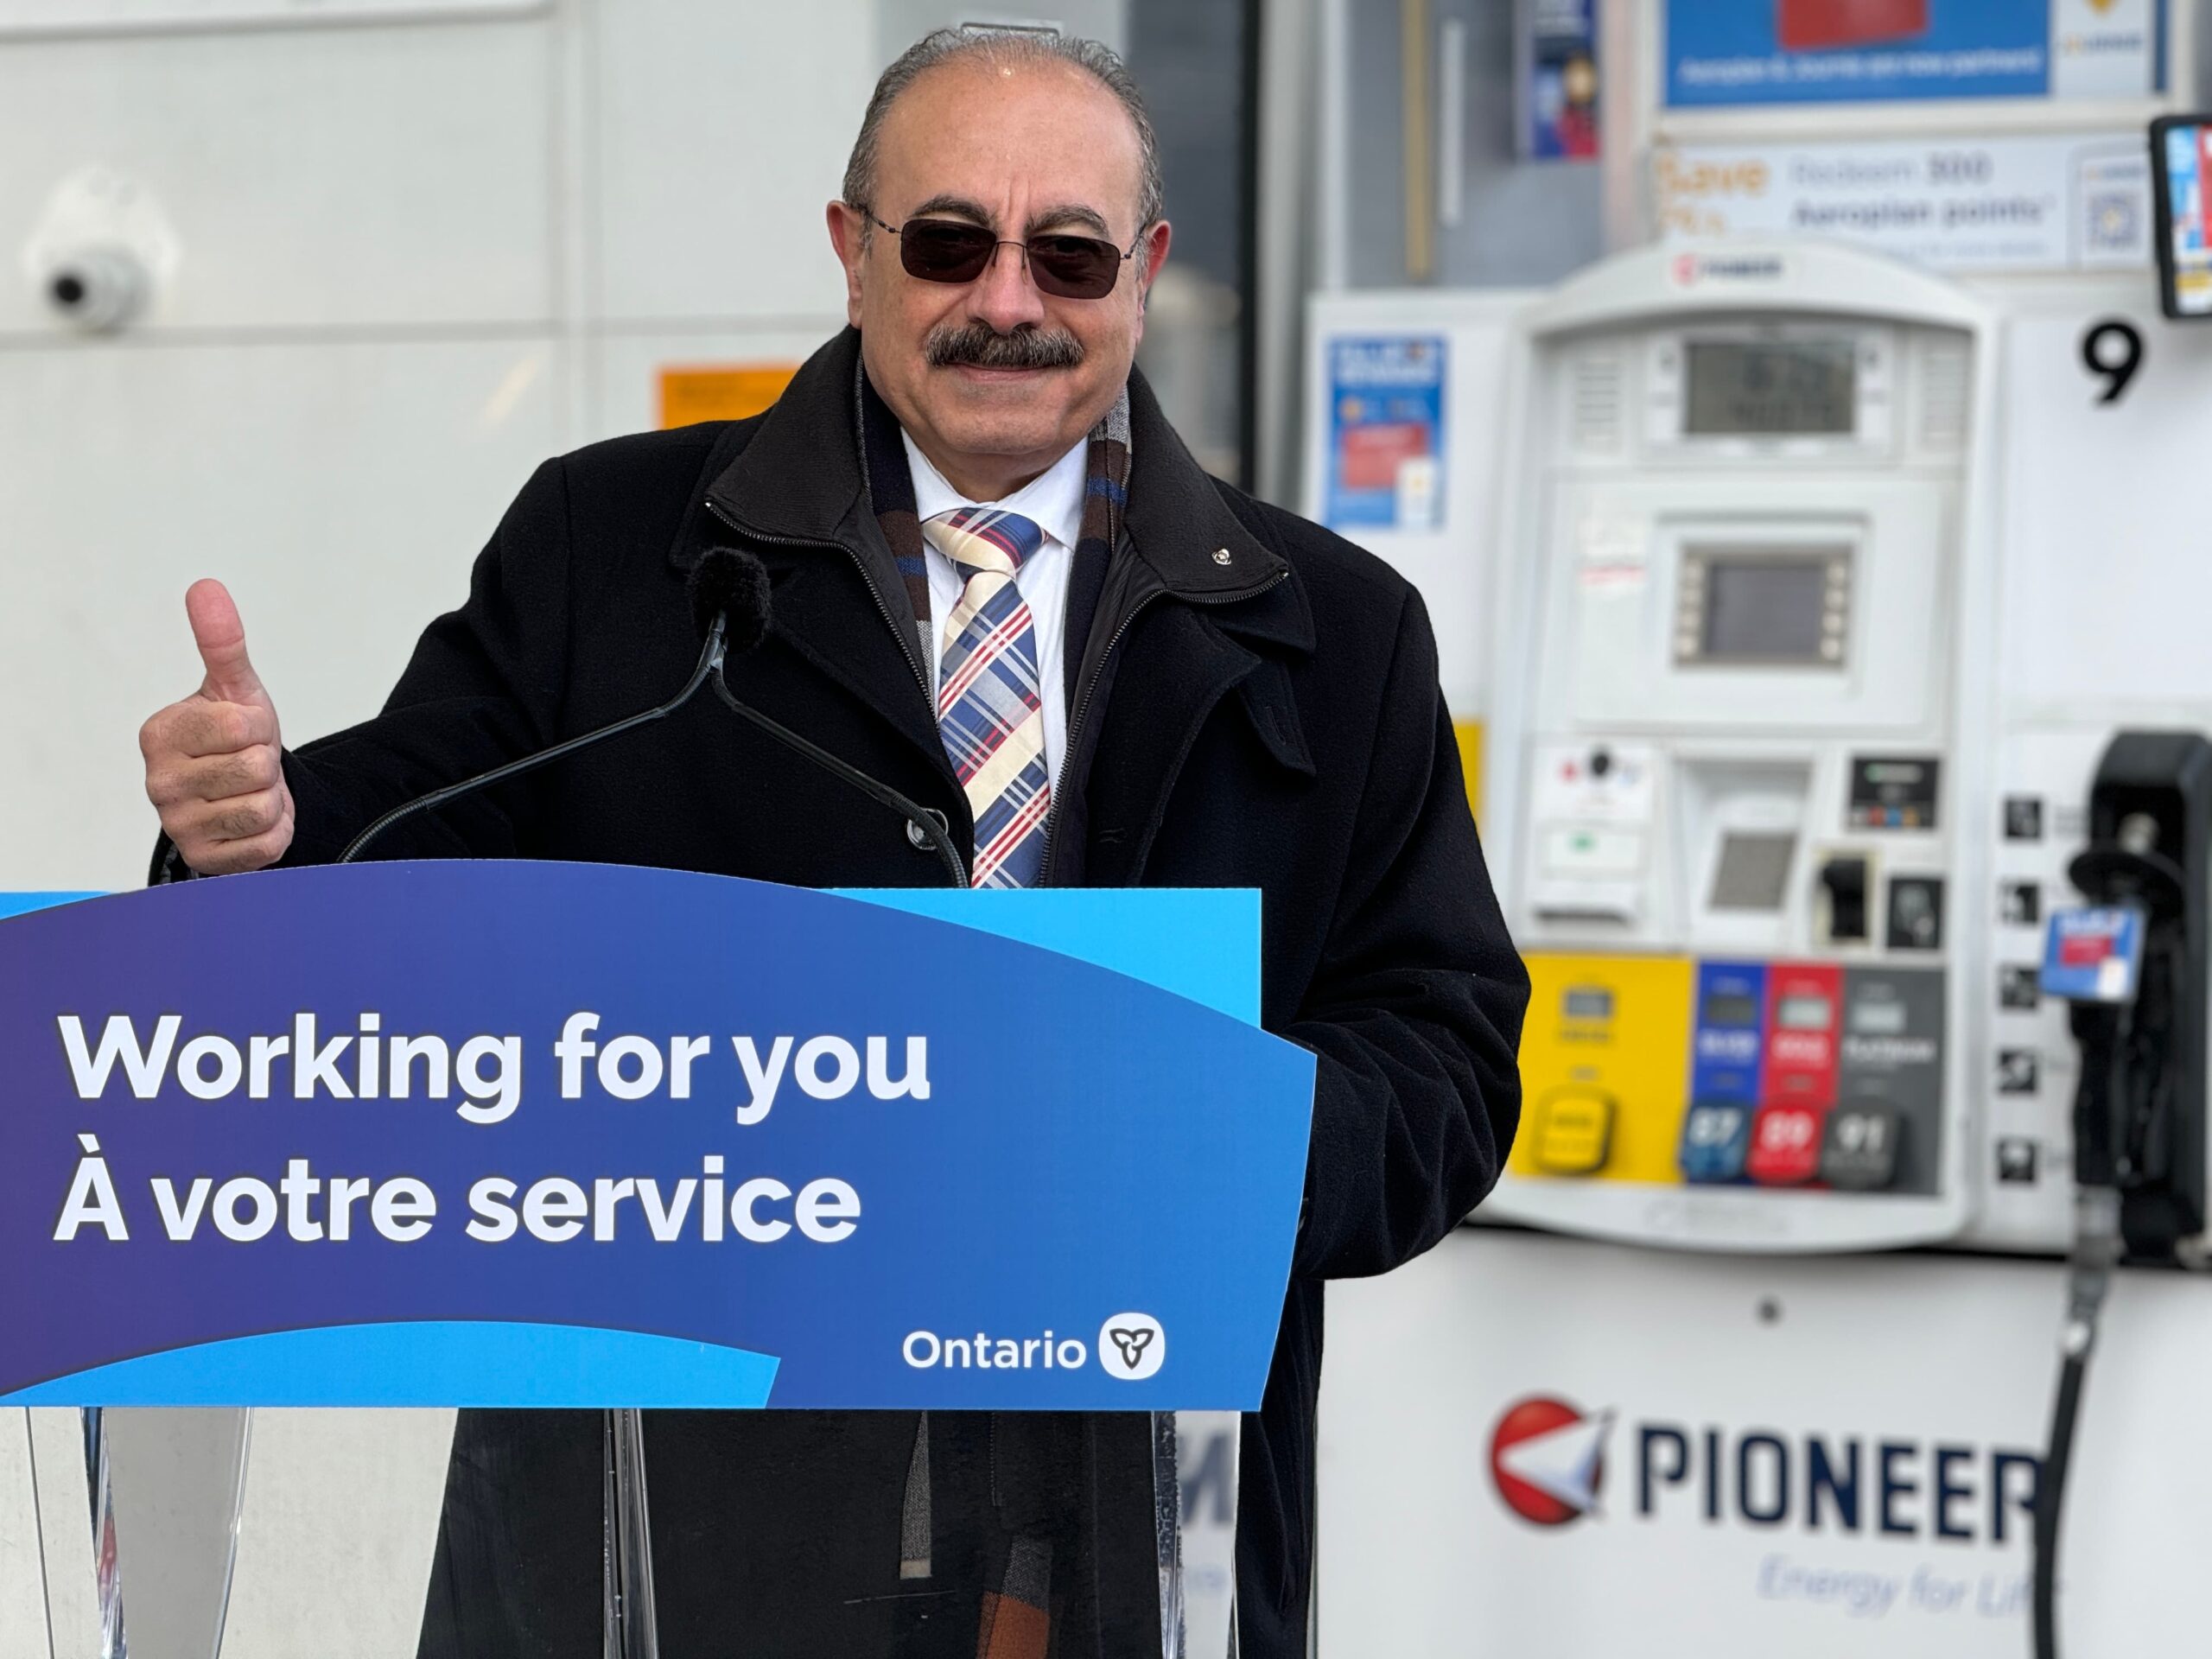 MPP Sabawy gives a thumbs up in front of a gas station pump and a sign that reads "Working for you"